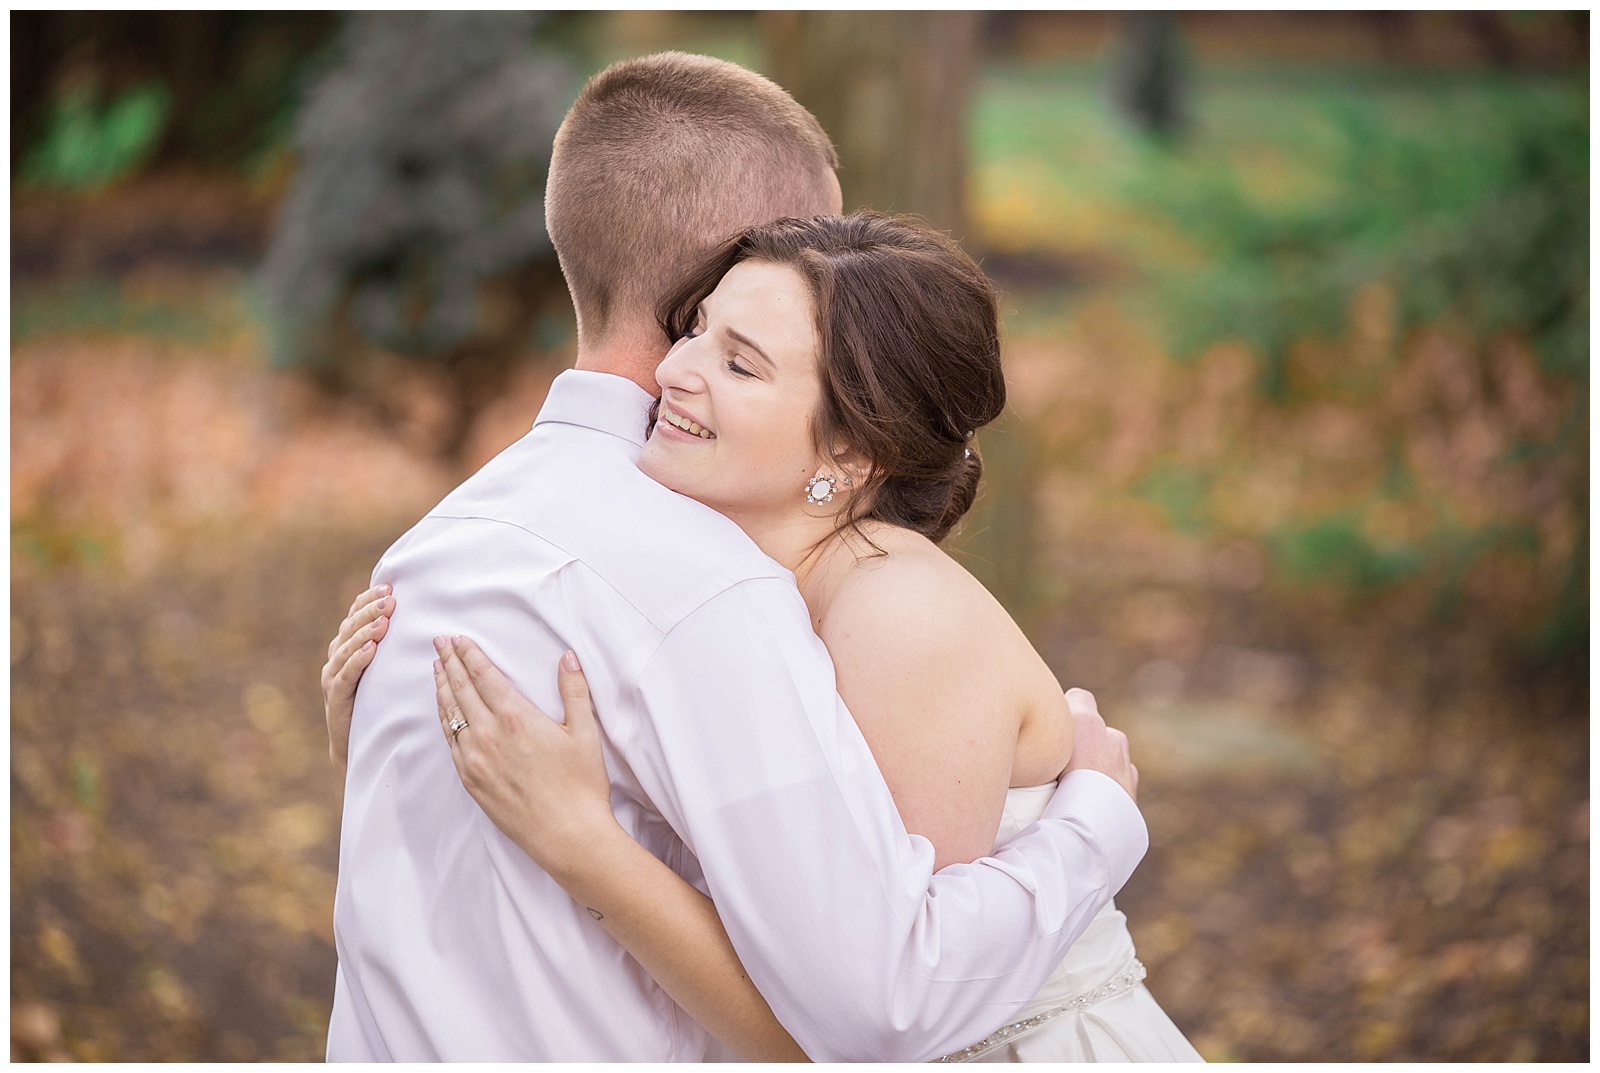 Outdoor Fall Wedding in Ohio | Monica Brown Photography | monicabrownphoto.com